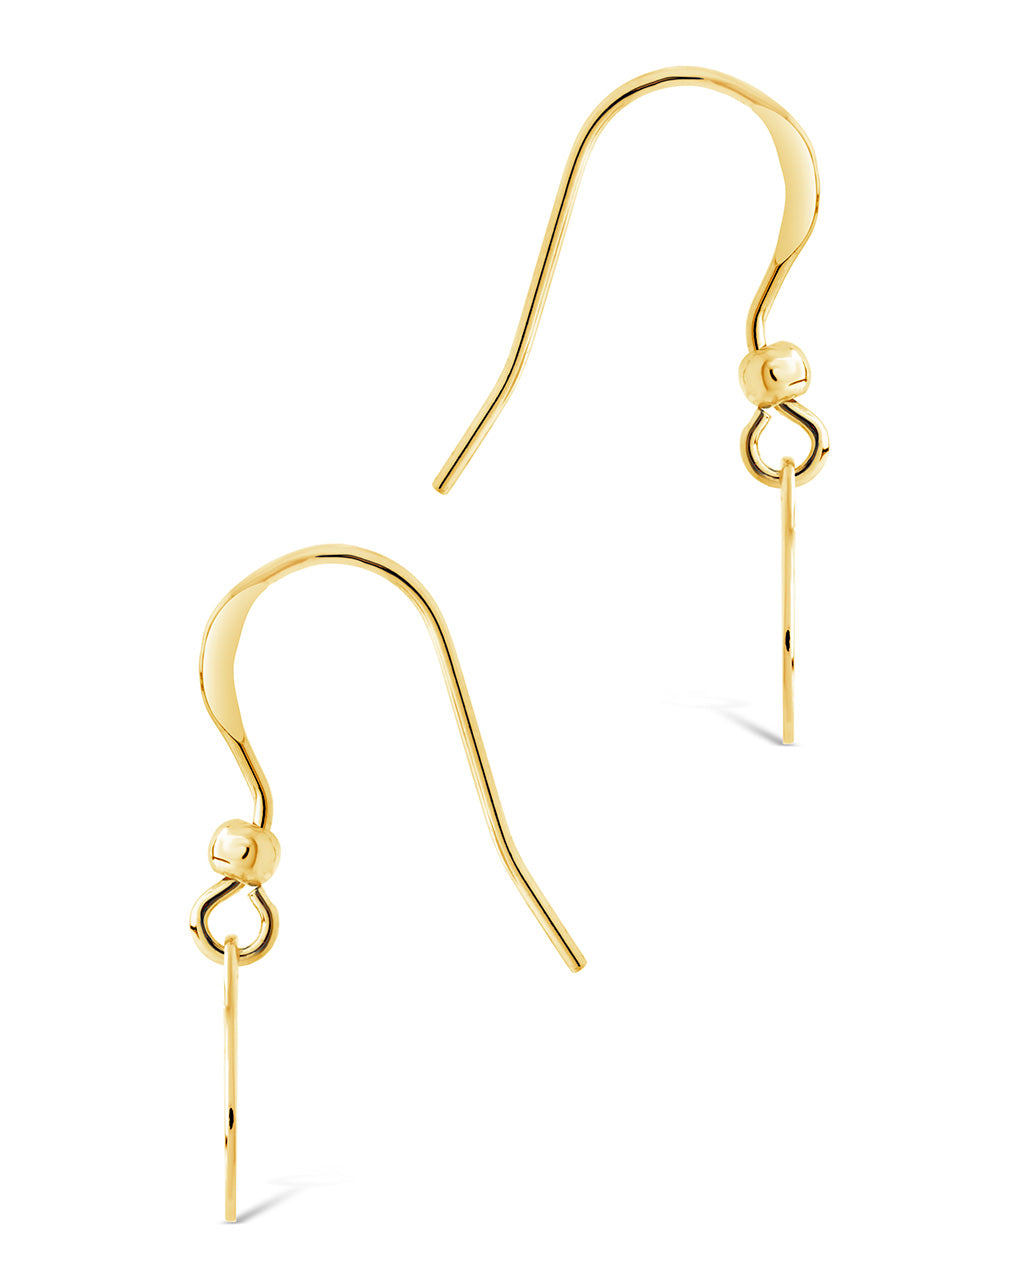 Sterling Silver Pointed Needle Drops & 14k Gold Thorn Hook Earrings